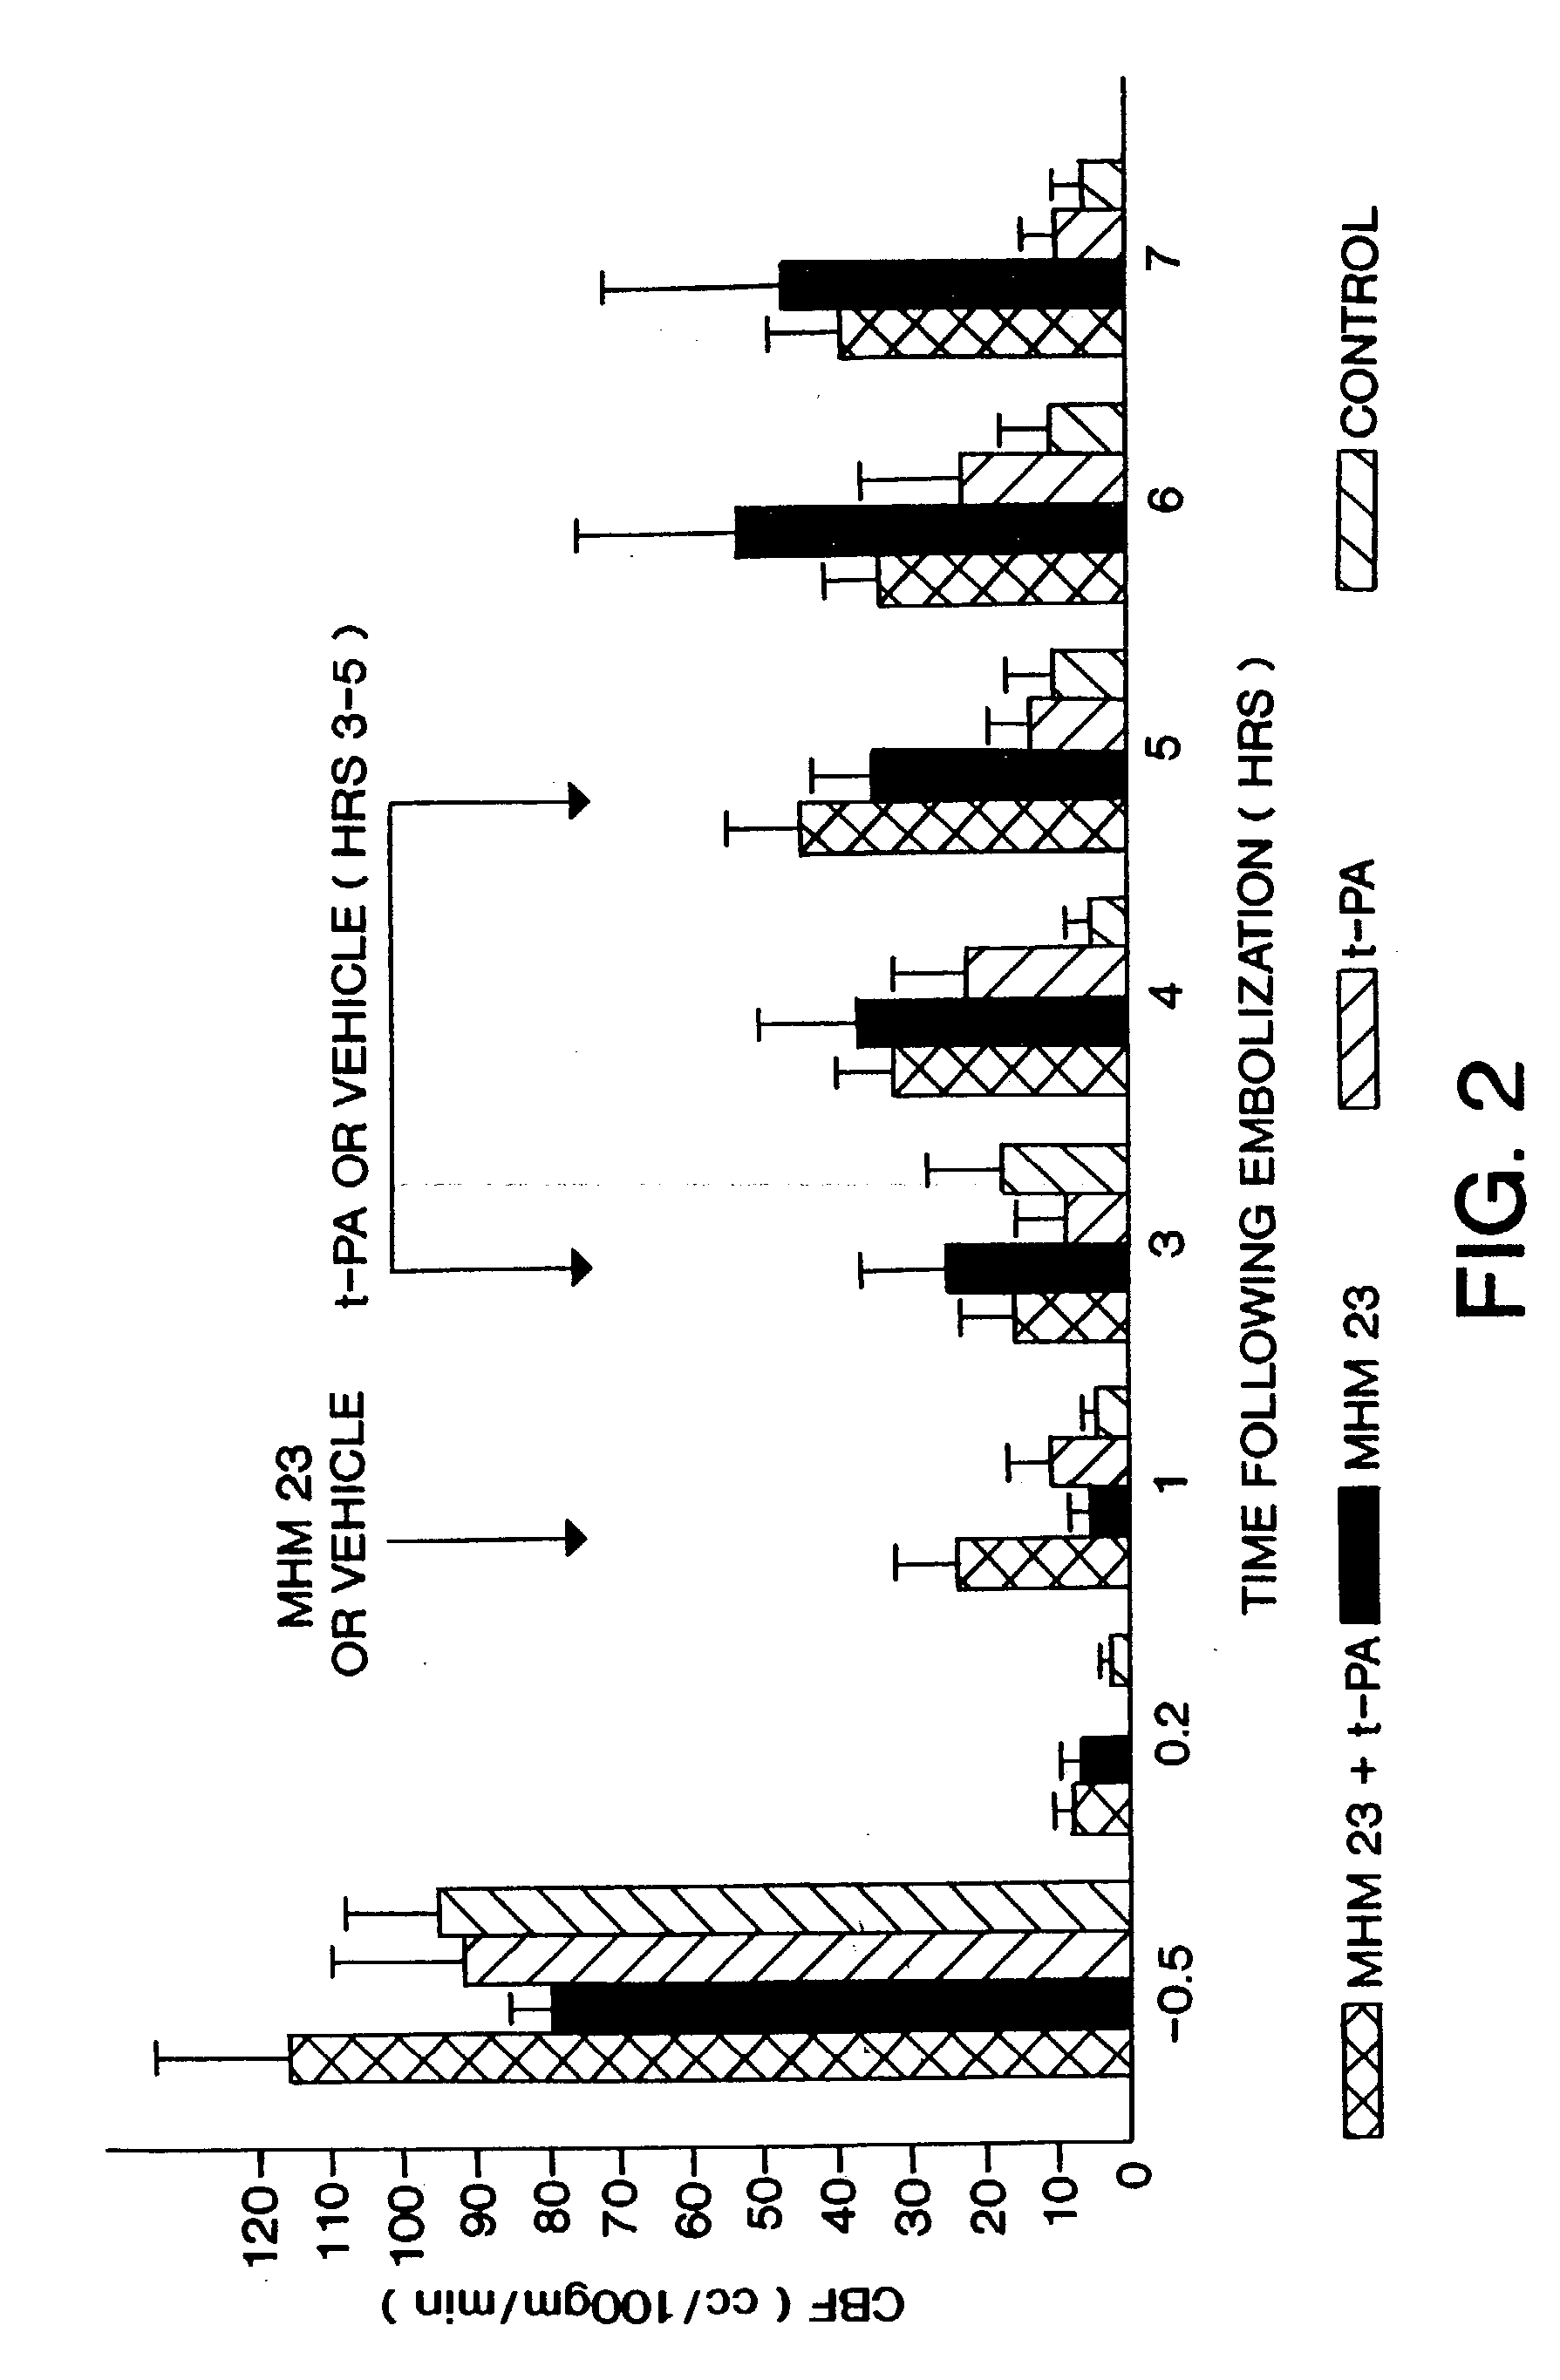 Co-administration of a thrombolytic and an anti-CD18 antibody in stroke